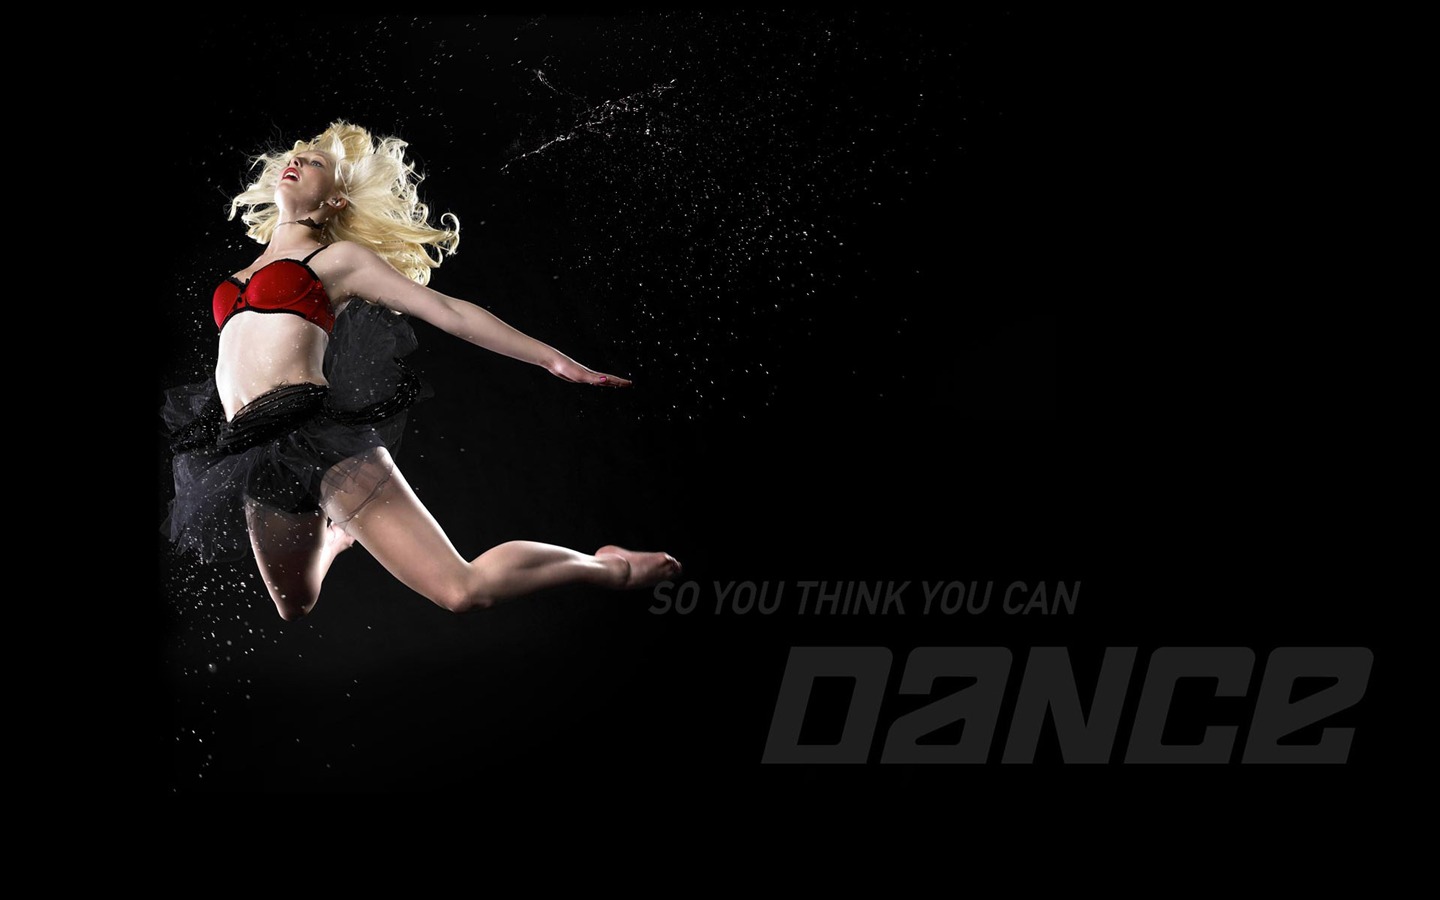 So You Think You Can Dance Wallpaper (1) #13 - 1440x900